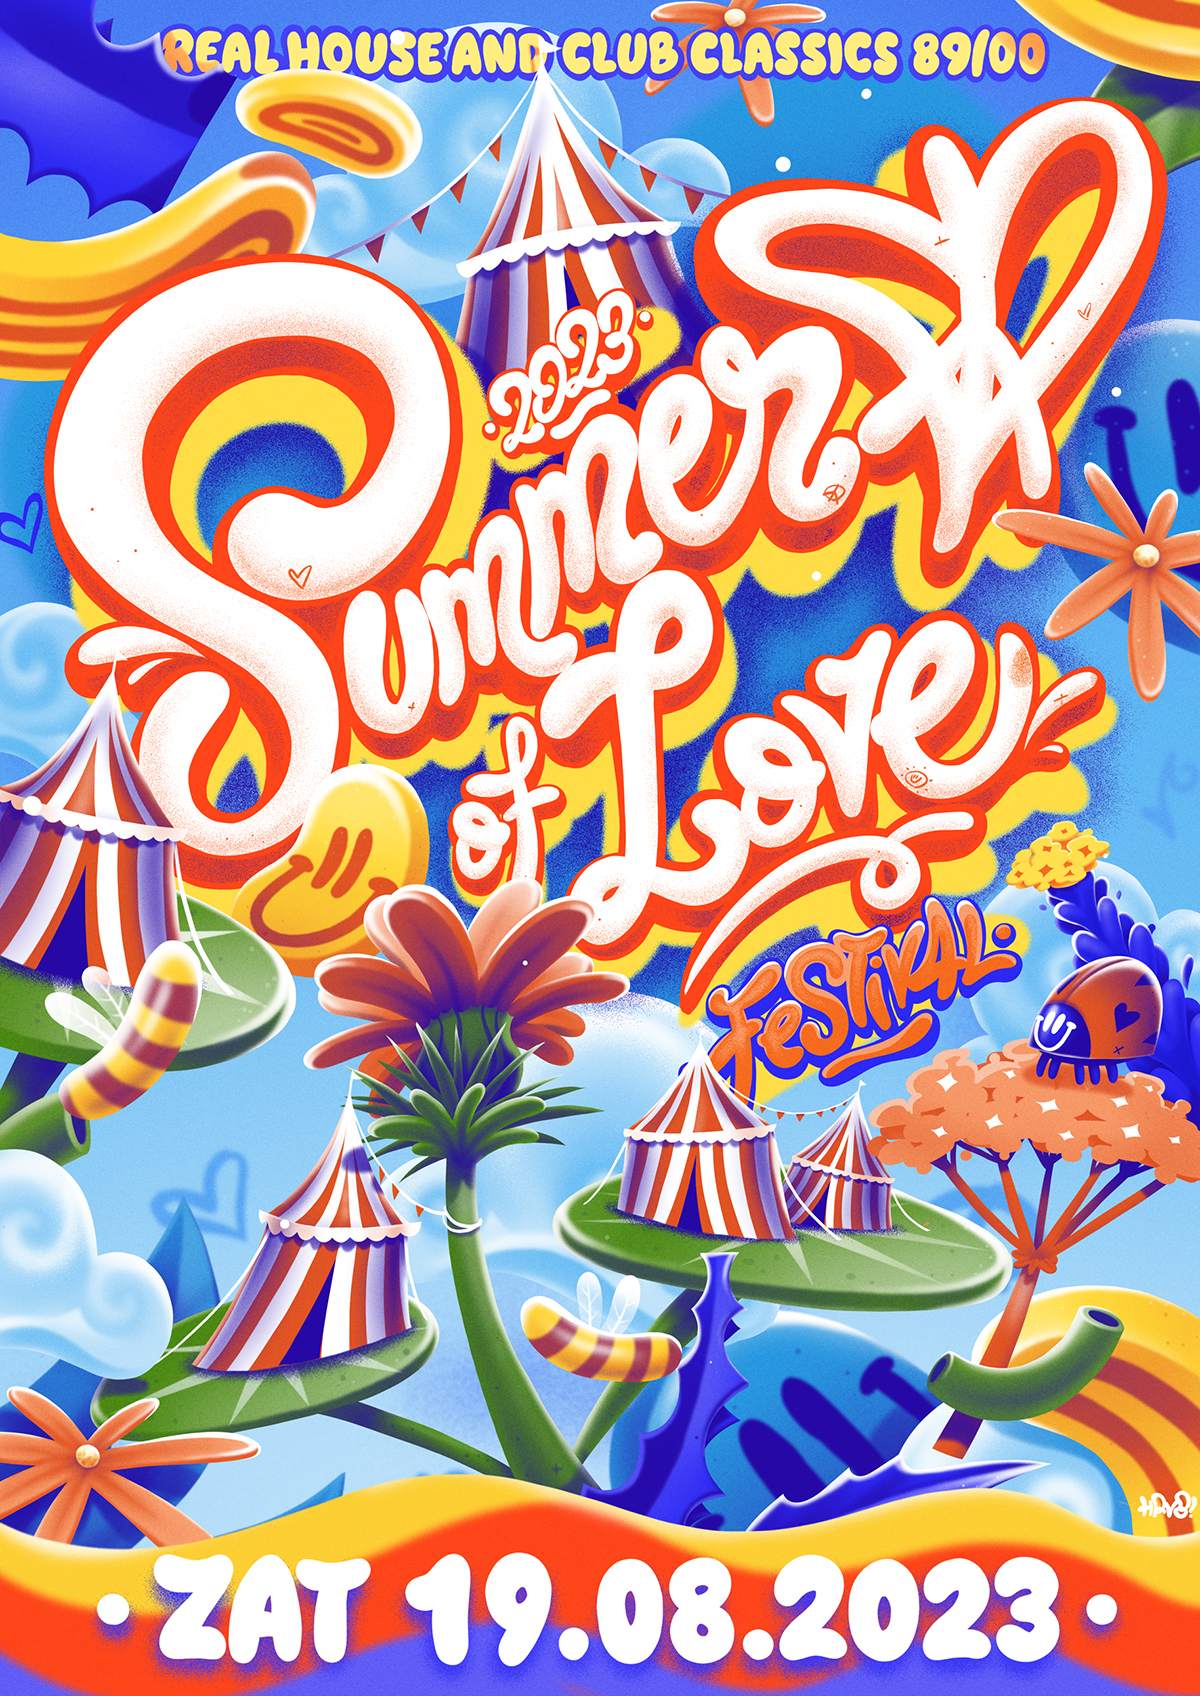 SOLD OUT - Summer Of Love - Thuishaven[terrein] - Real House & Club Classics 89/05 - フライヤー表